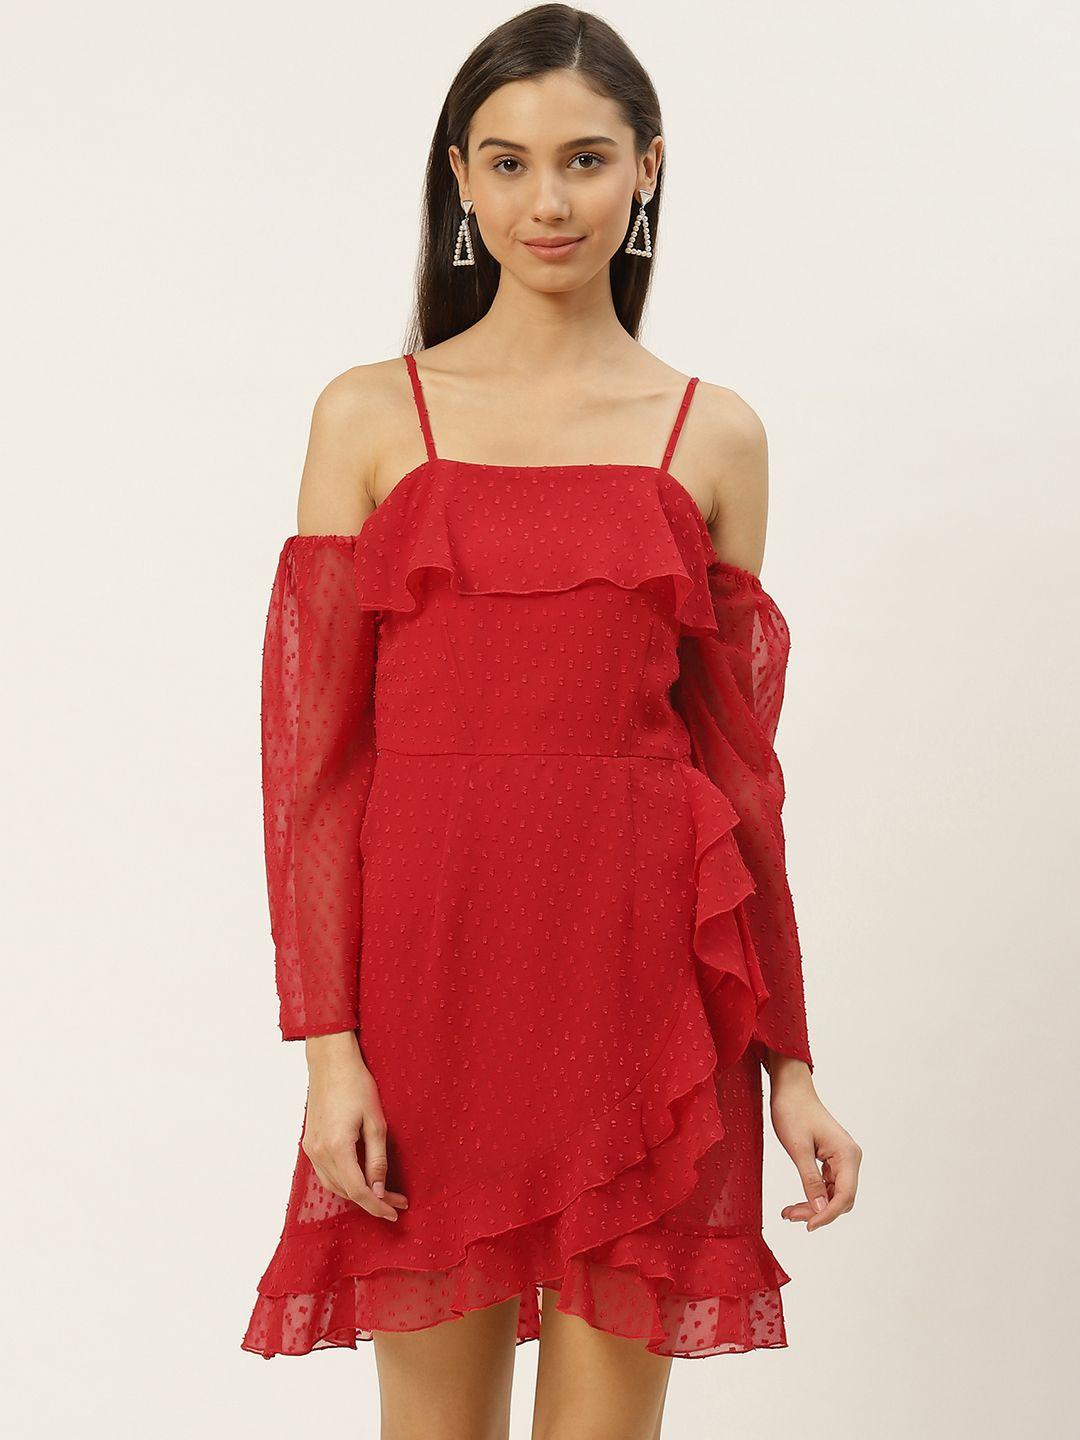 dodo-&-moa-women-red-dobby-weave-ruffled-a-line-semi-sheer-dress-with-cold-shoulder-sleeve